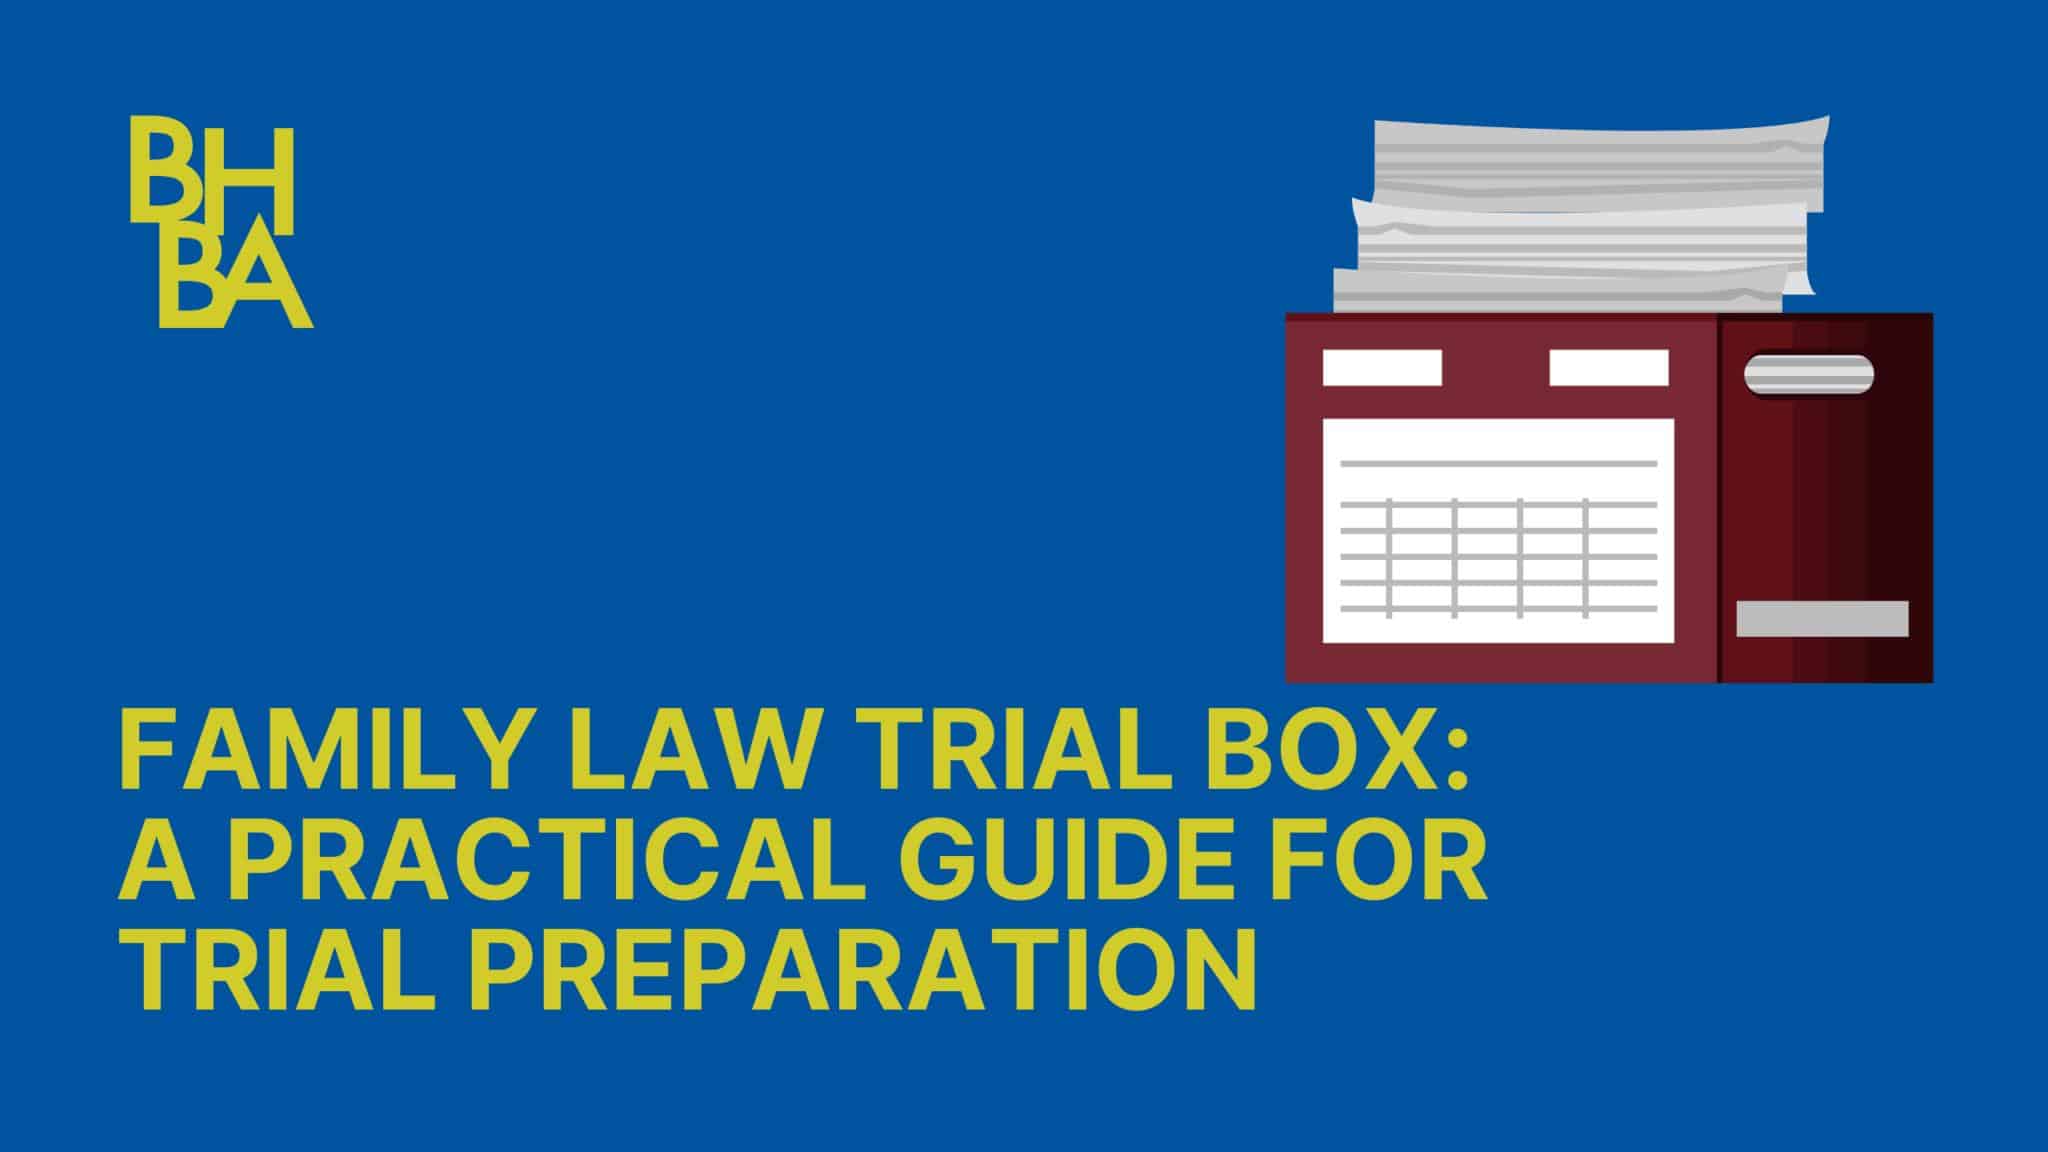 Family Law Trial Box - A Practical Guide for Trial Preparation